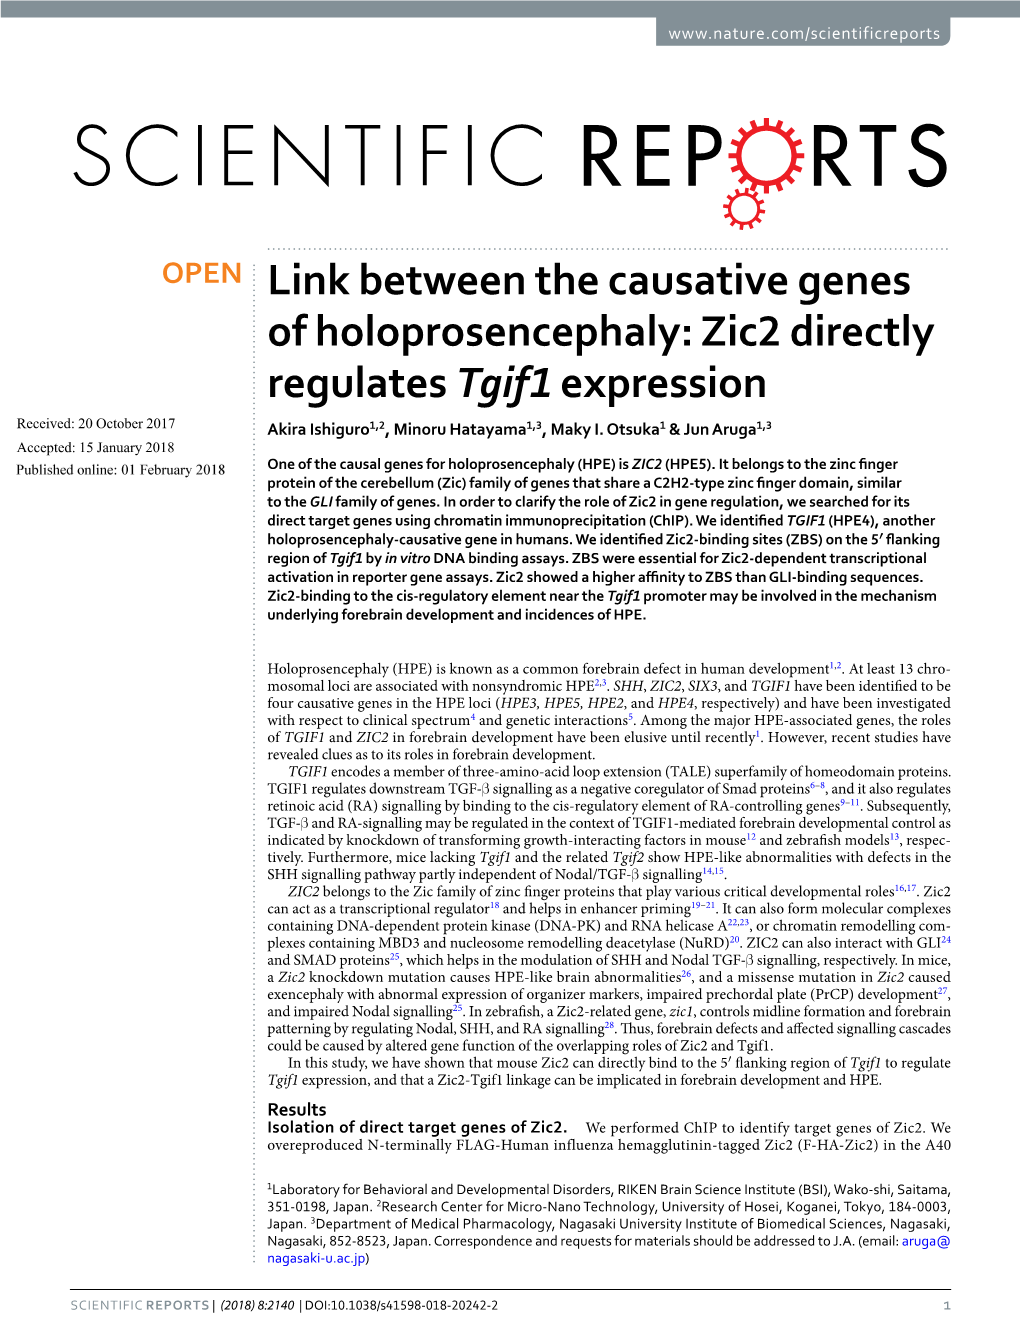 Link Between the Causative Genes of Holoprosencephaly: Zic2 Directly